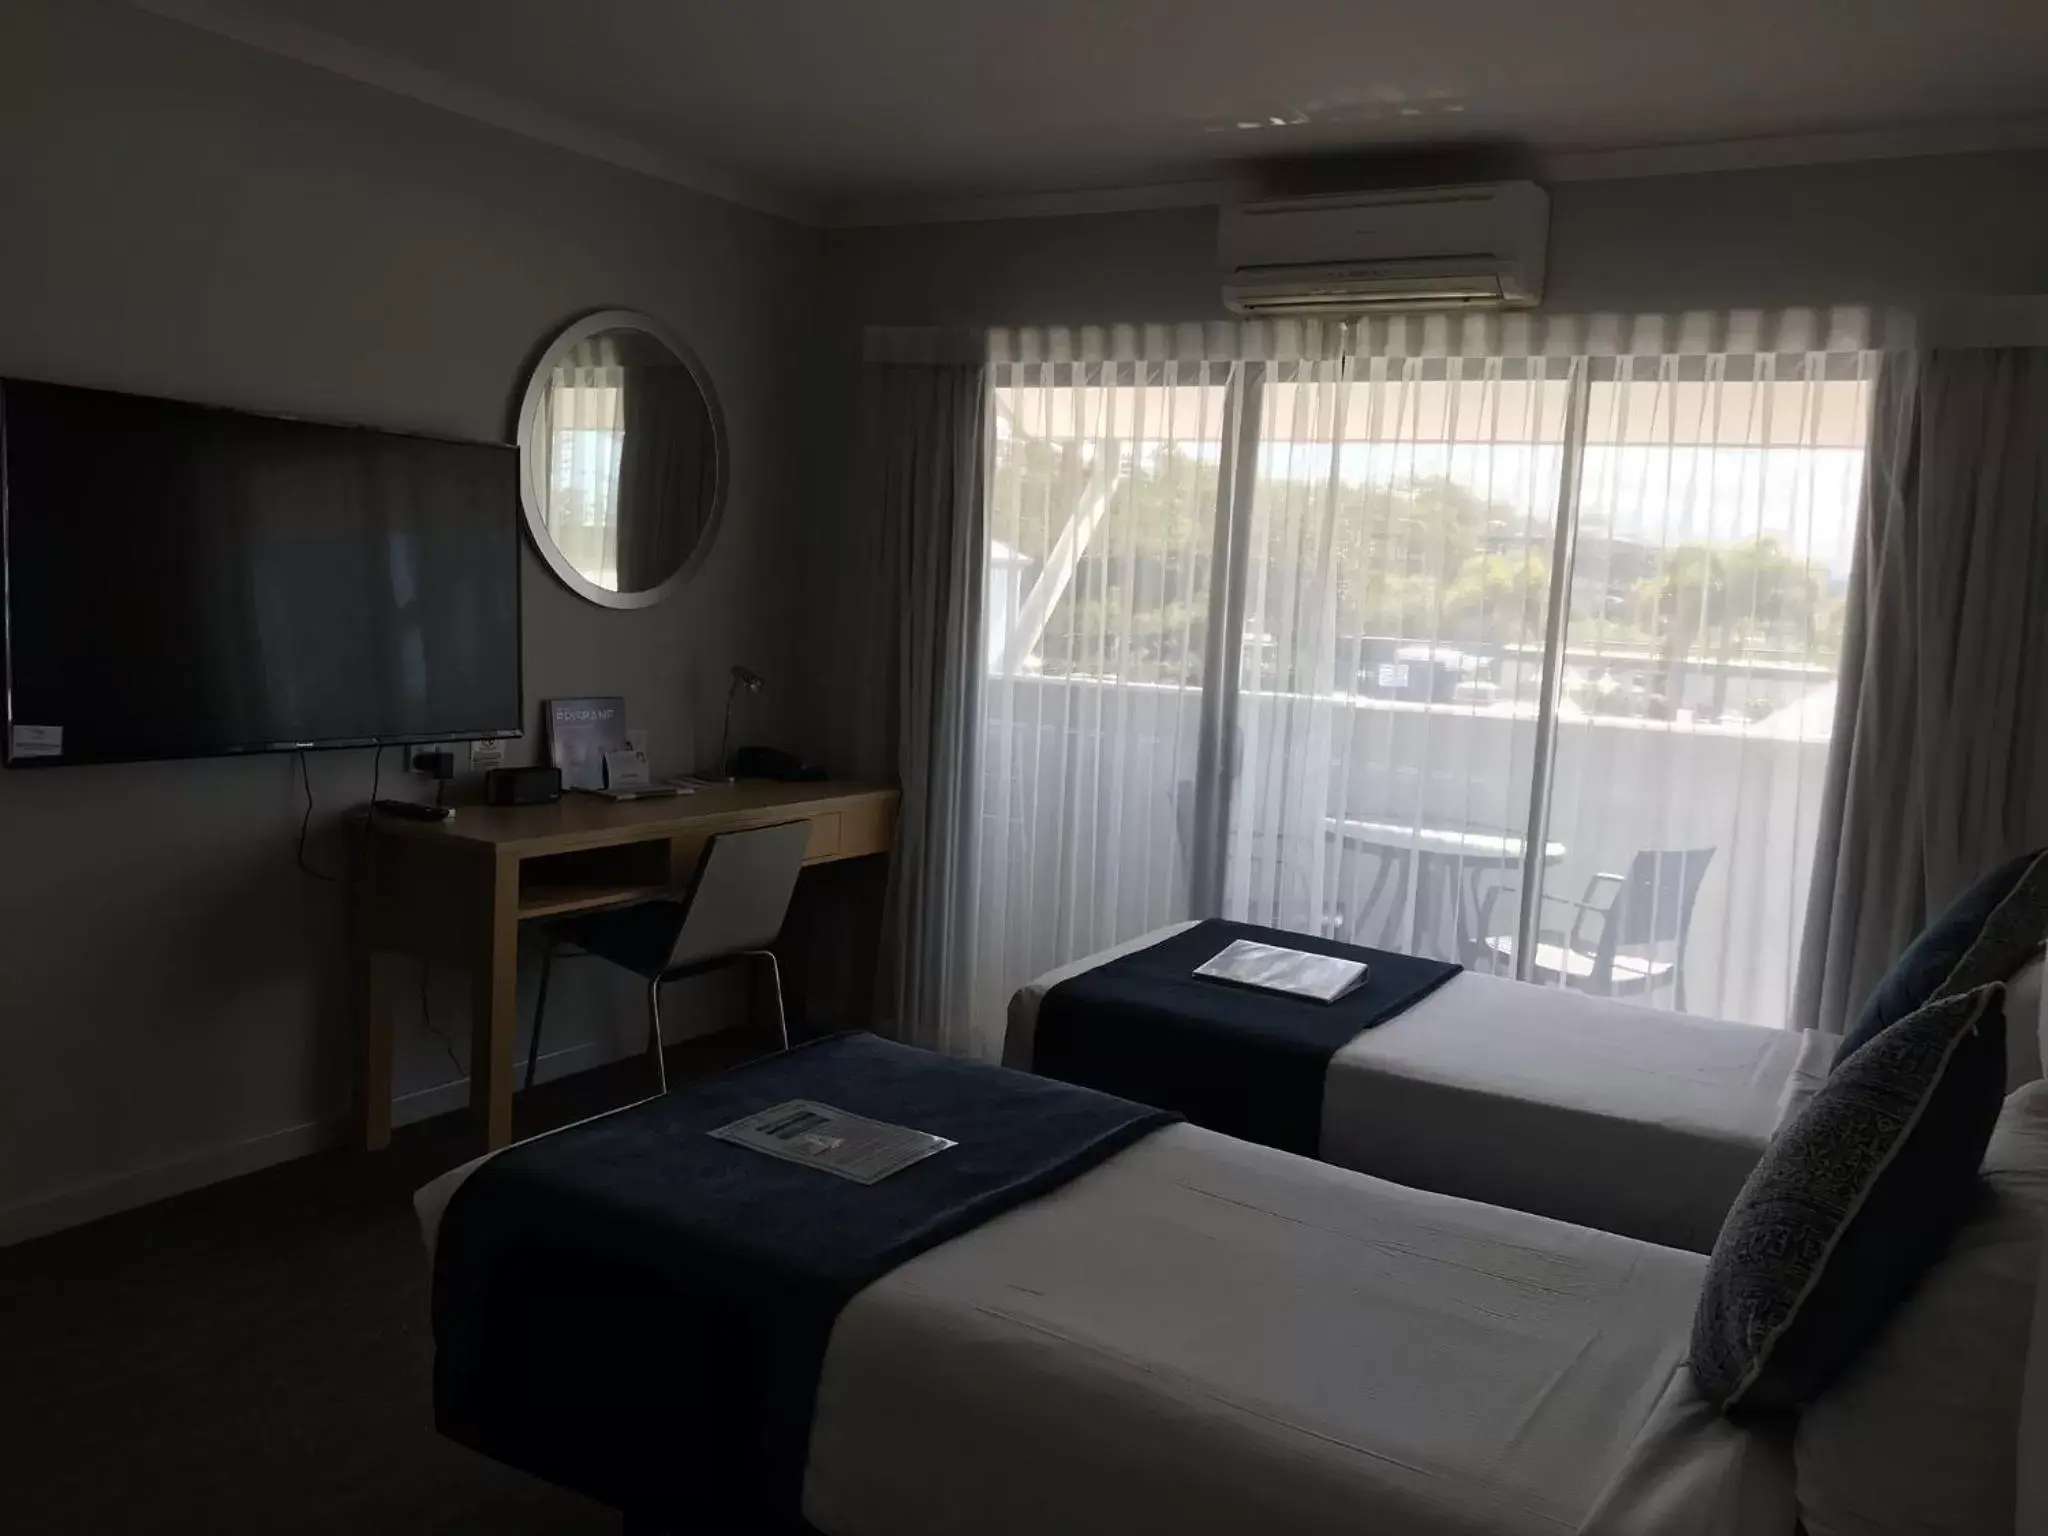 Bed in Manly Marina Cove Motel